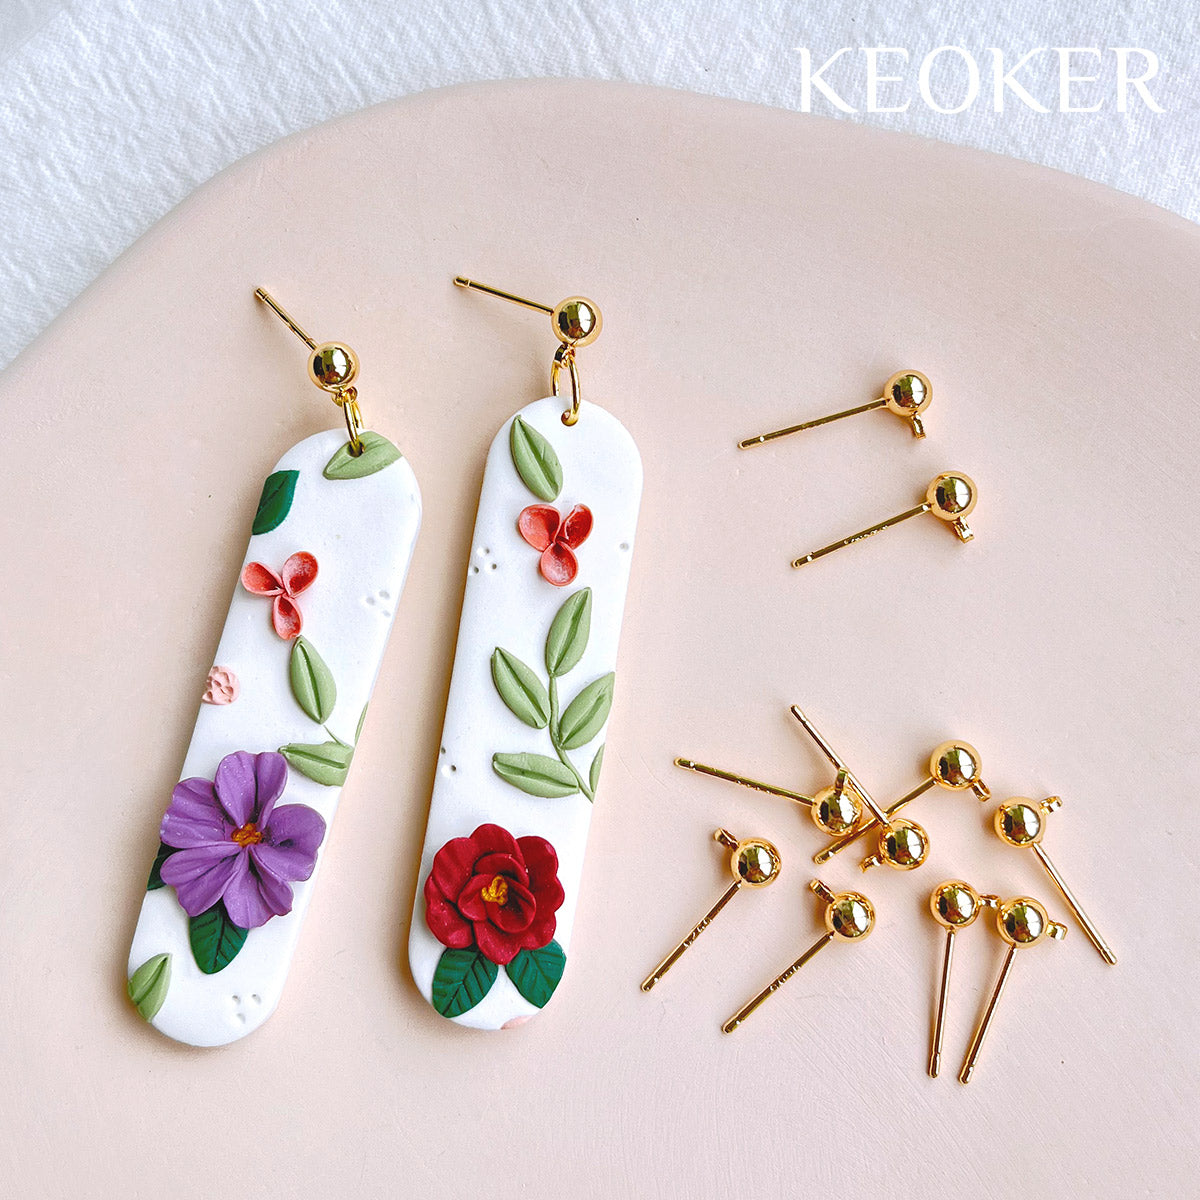  Keoker Clay Cutters, Polymer Clay Cutters, Long Dangle Shape  Polymer Clay Cutter (5PCS A) : Home & Kitchen